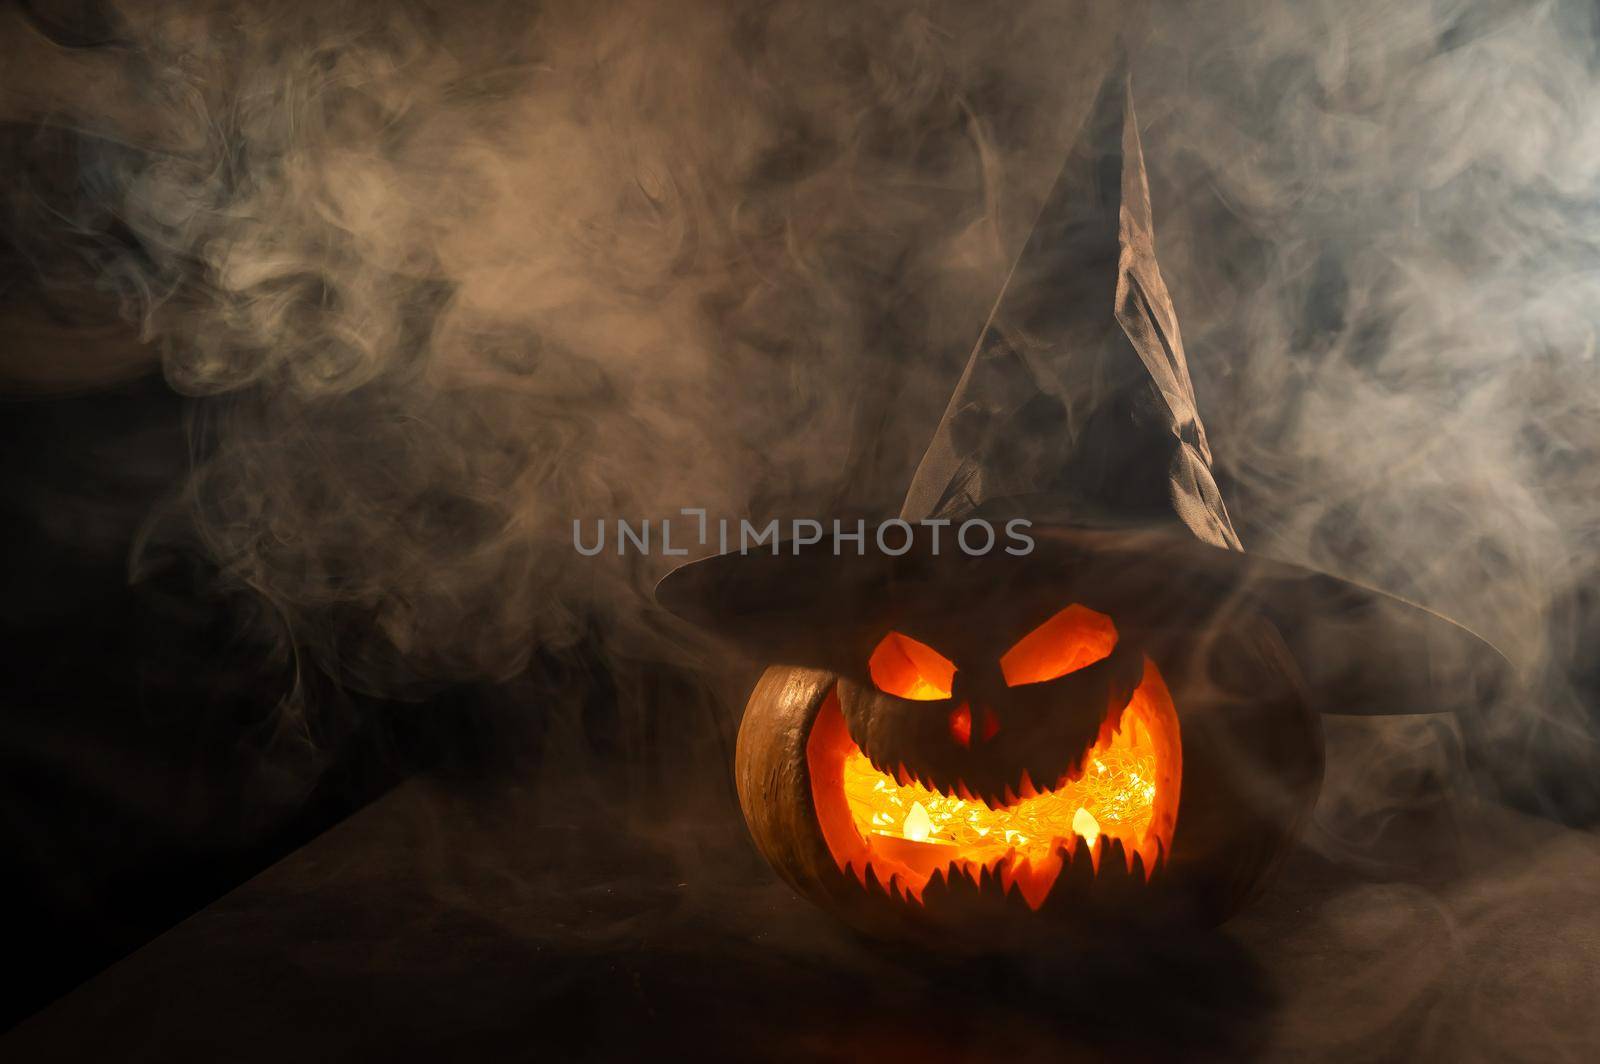 A creepy pumpkin with a carved grimace in the smoke. Jack o lantern in the dark